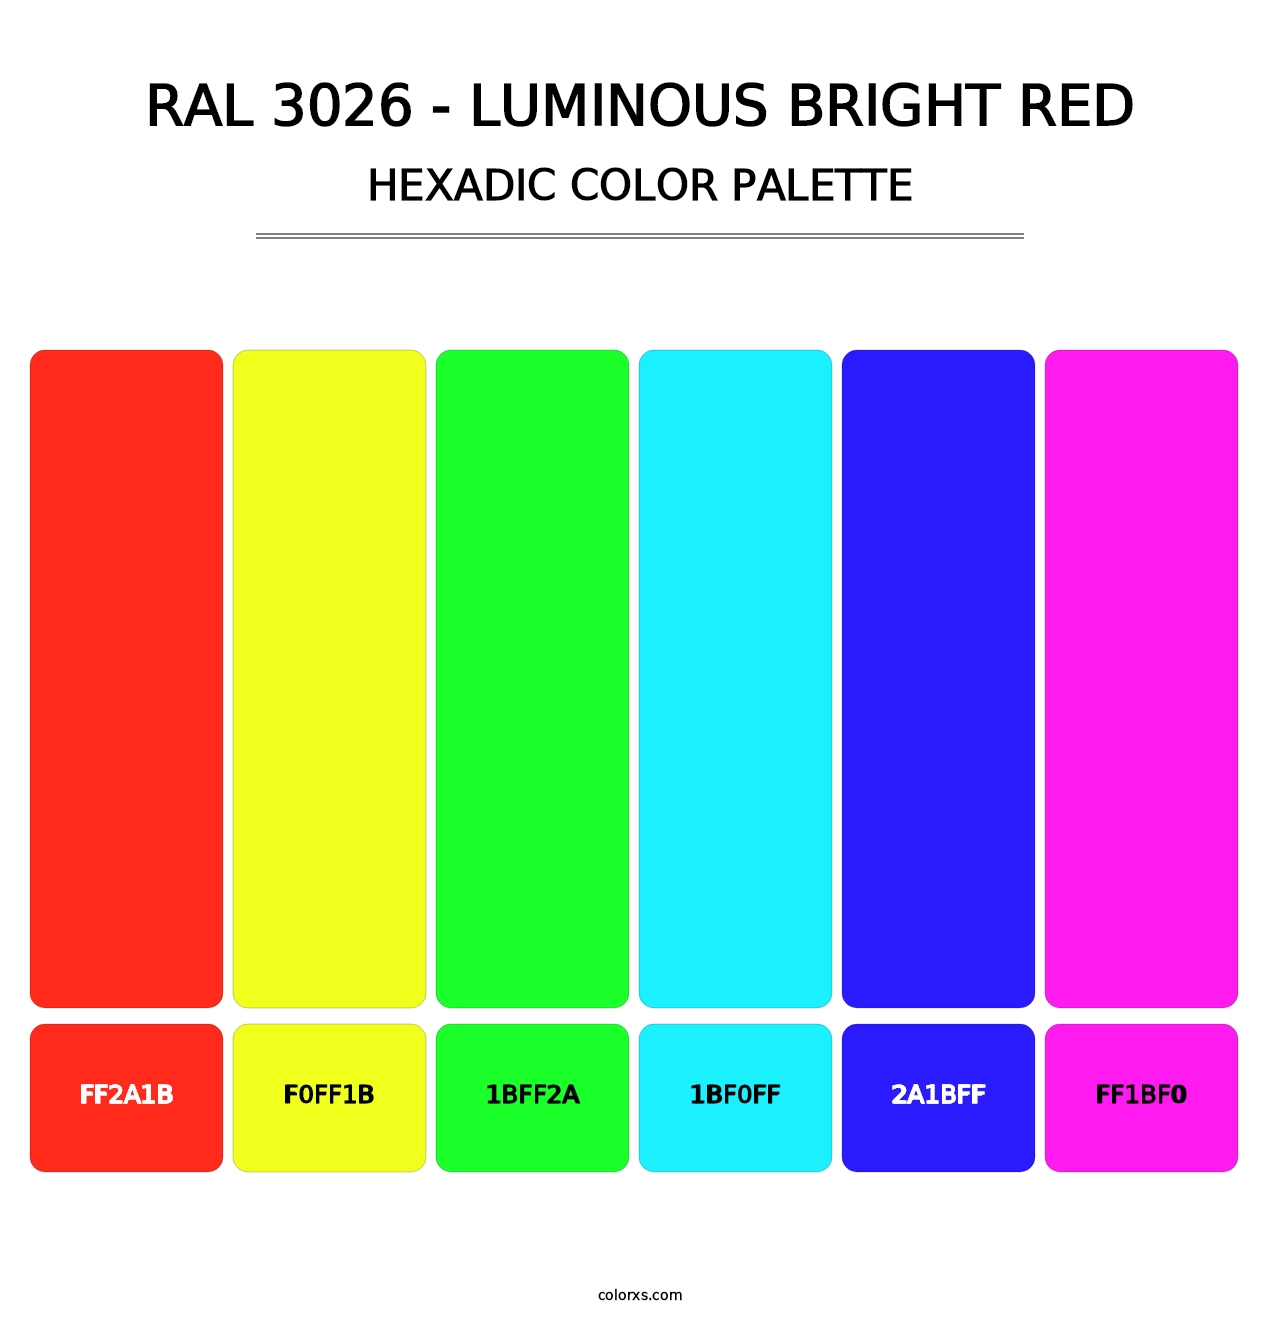 RAL 3026 - Luminous Bright Red - Hexadic Color Palette